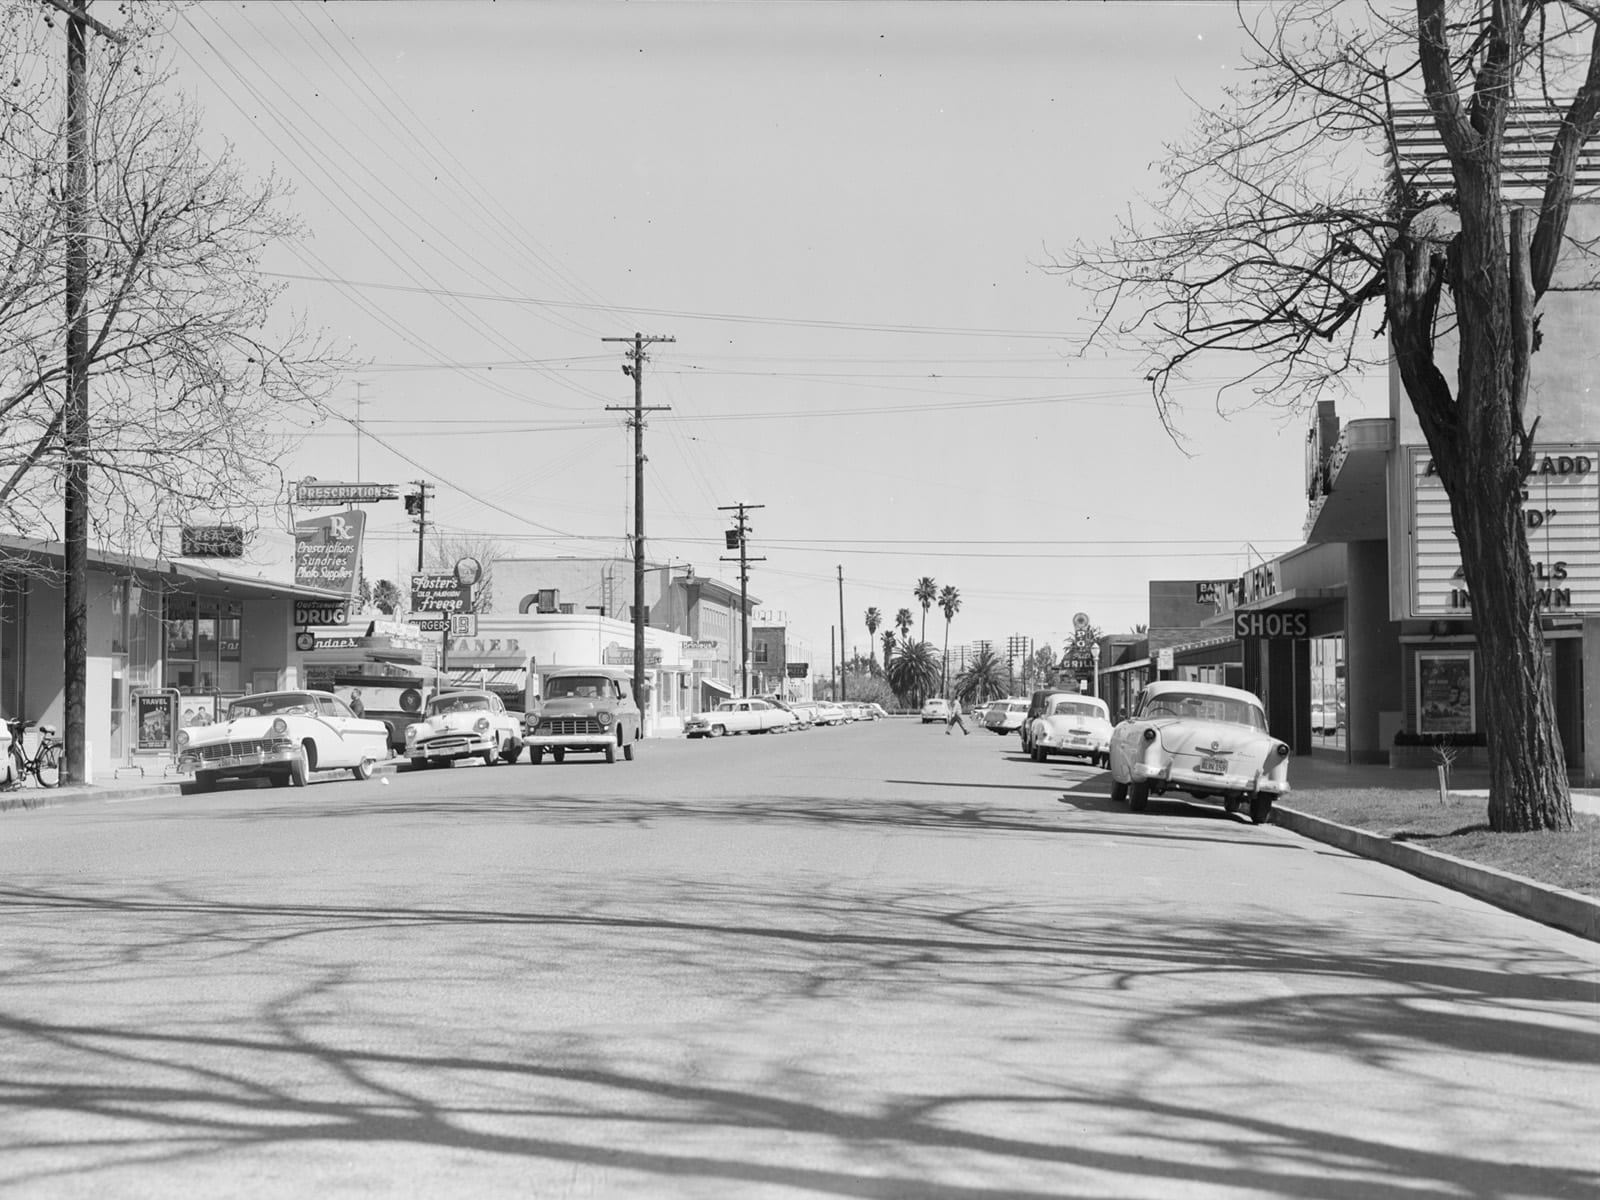 Second Street between E and F Streets, looking east, 1957